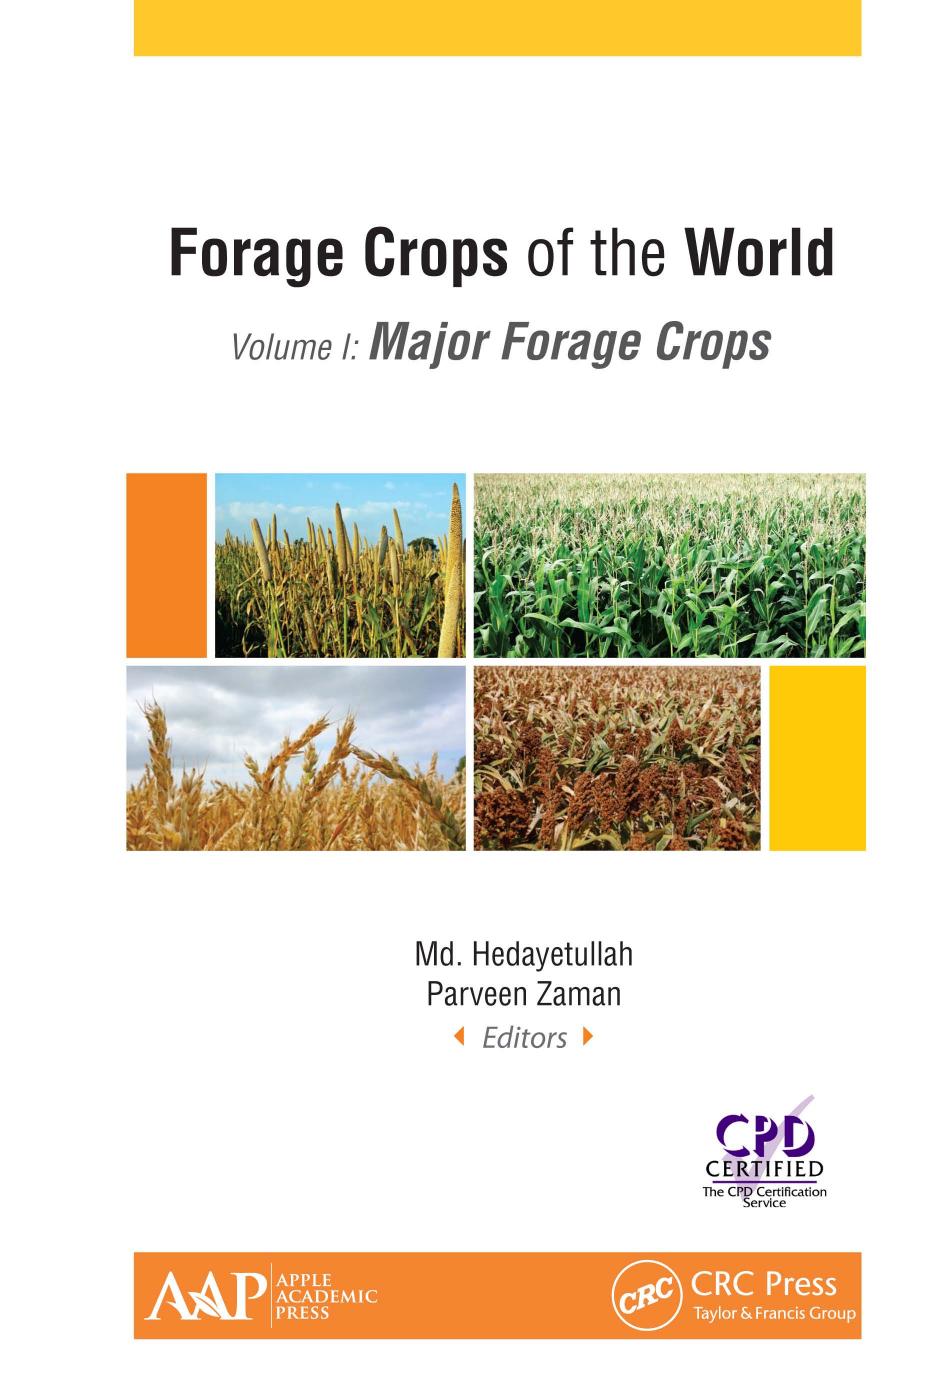 FORAGE CROPS OF THE WORLD